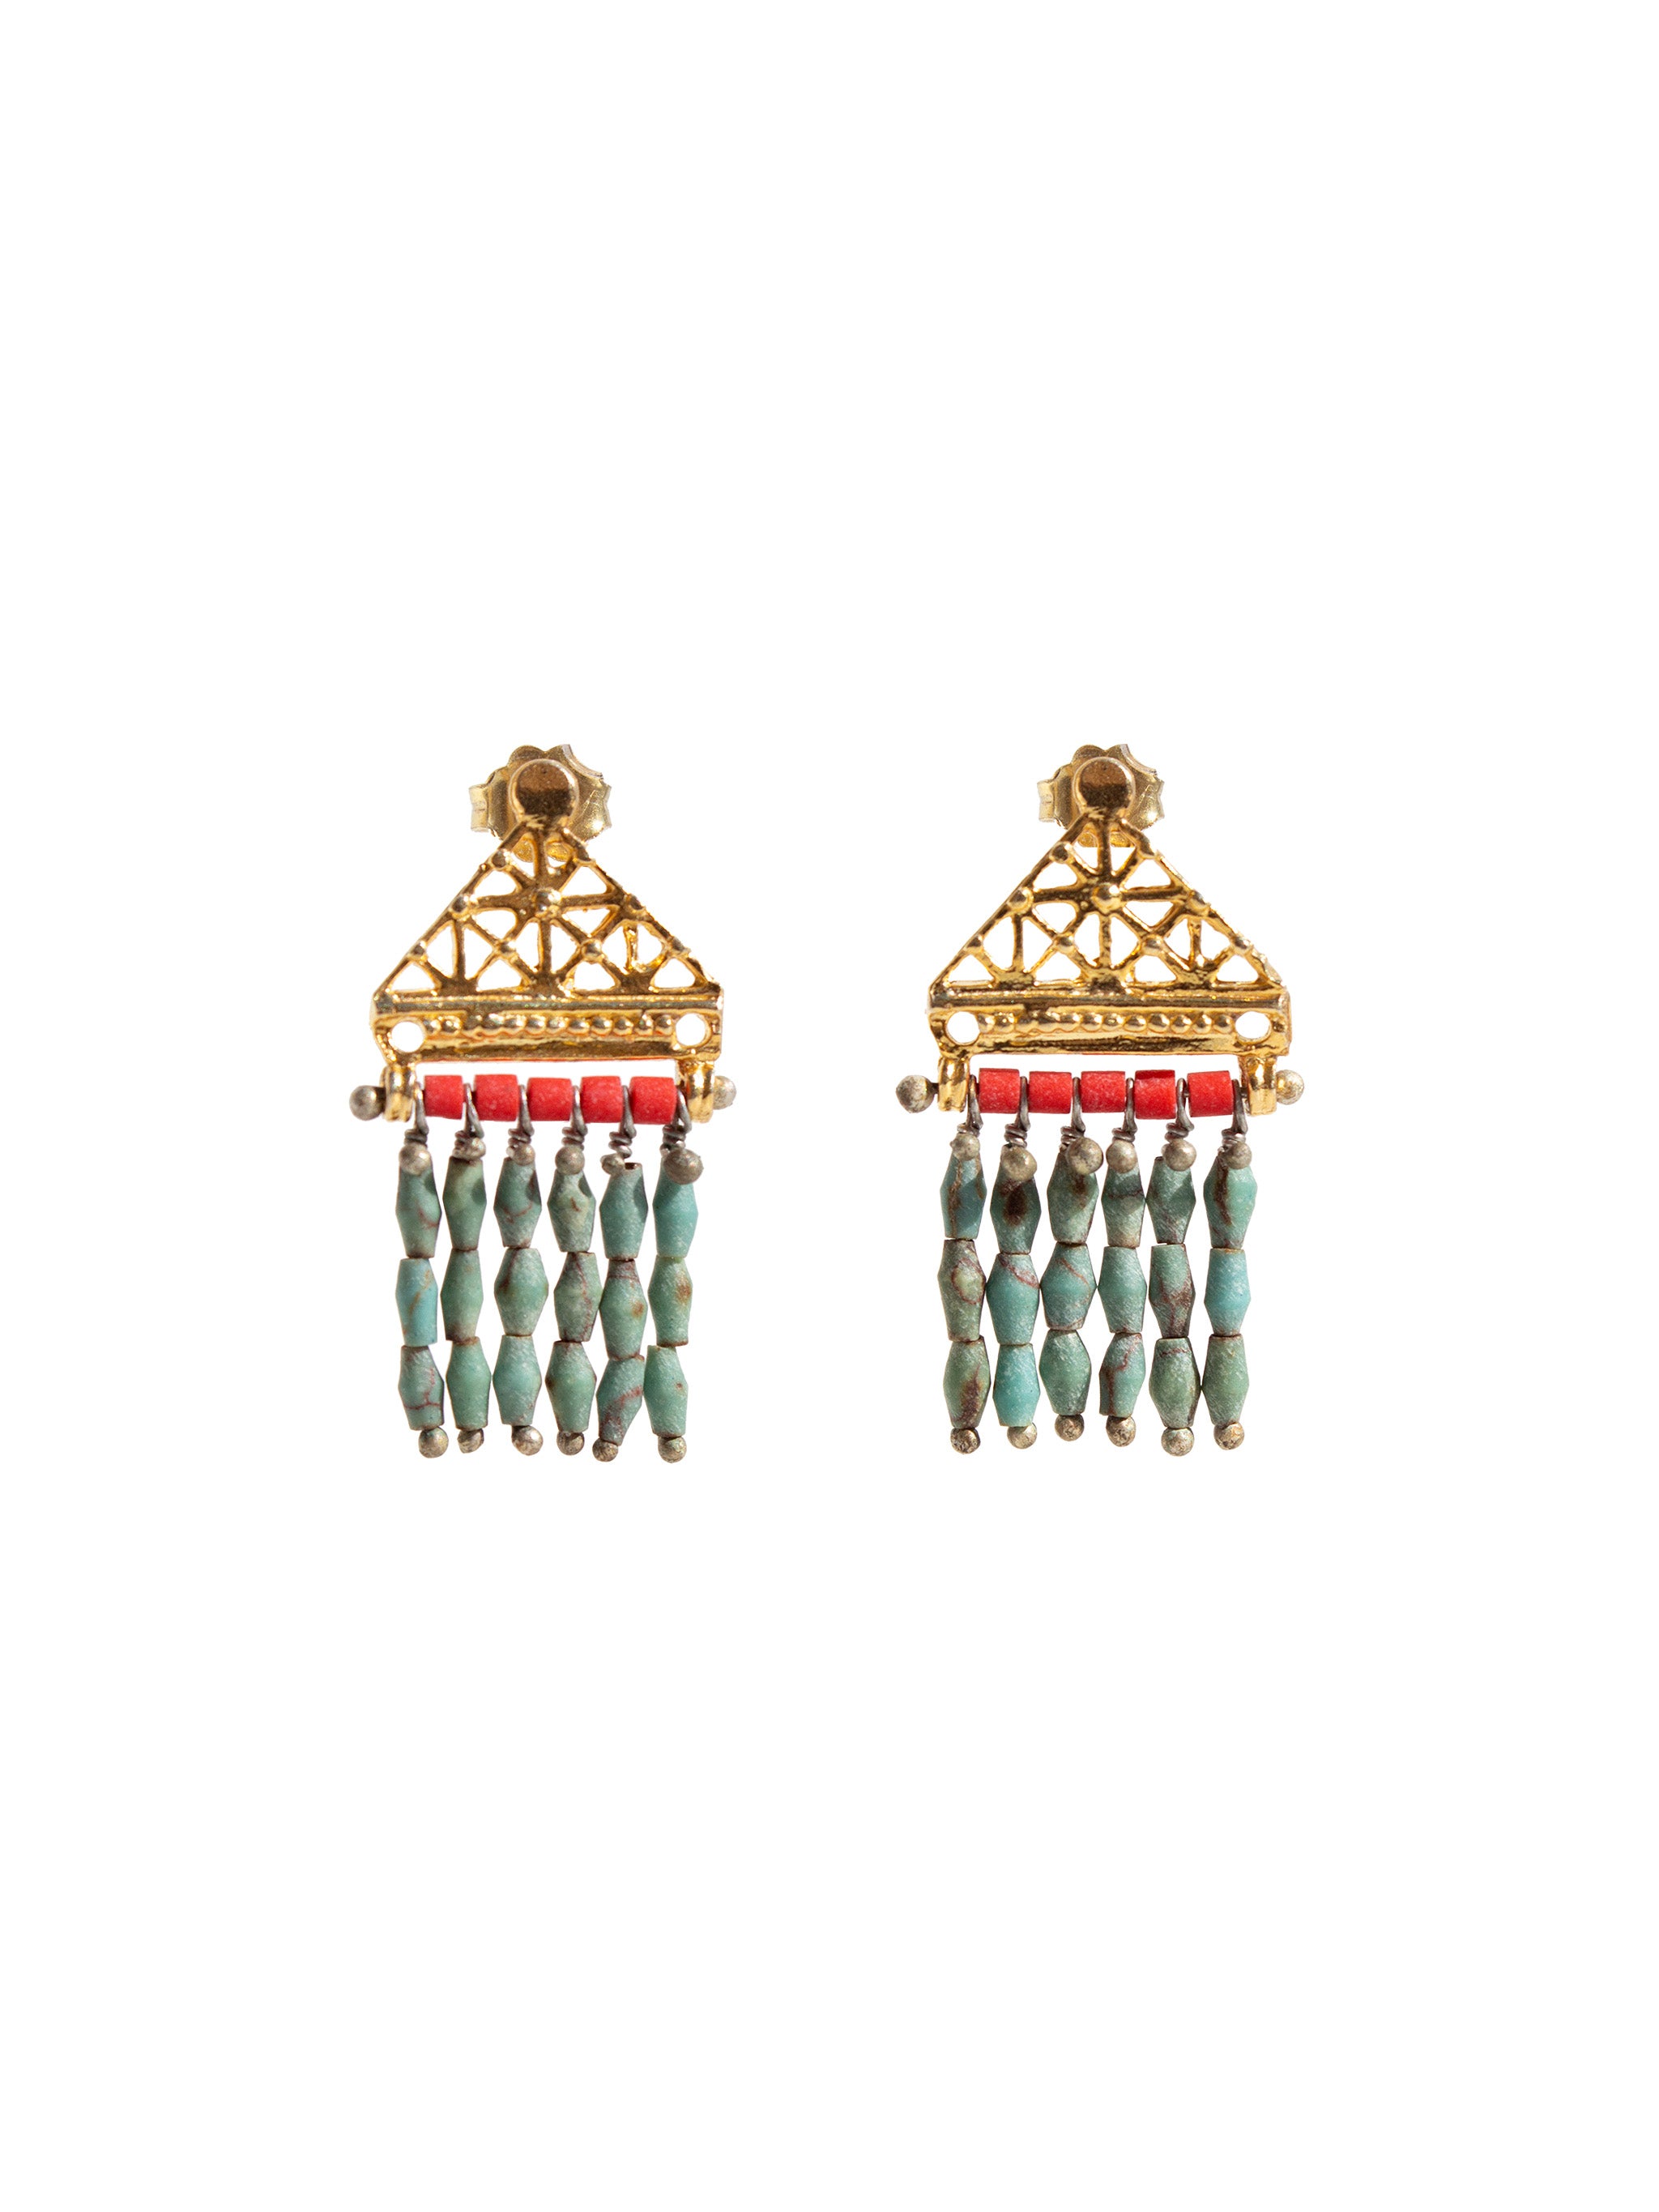 Turquoise and coral earrings